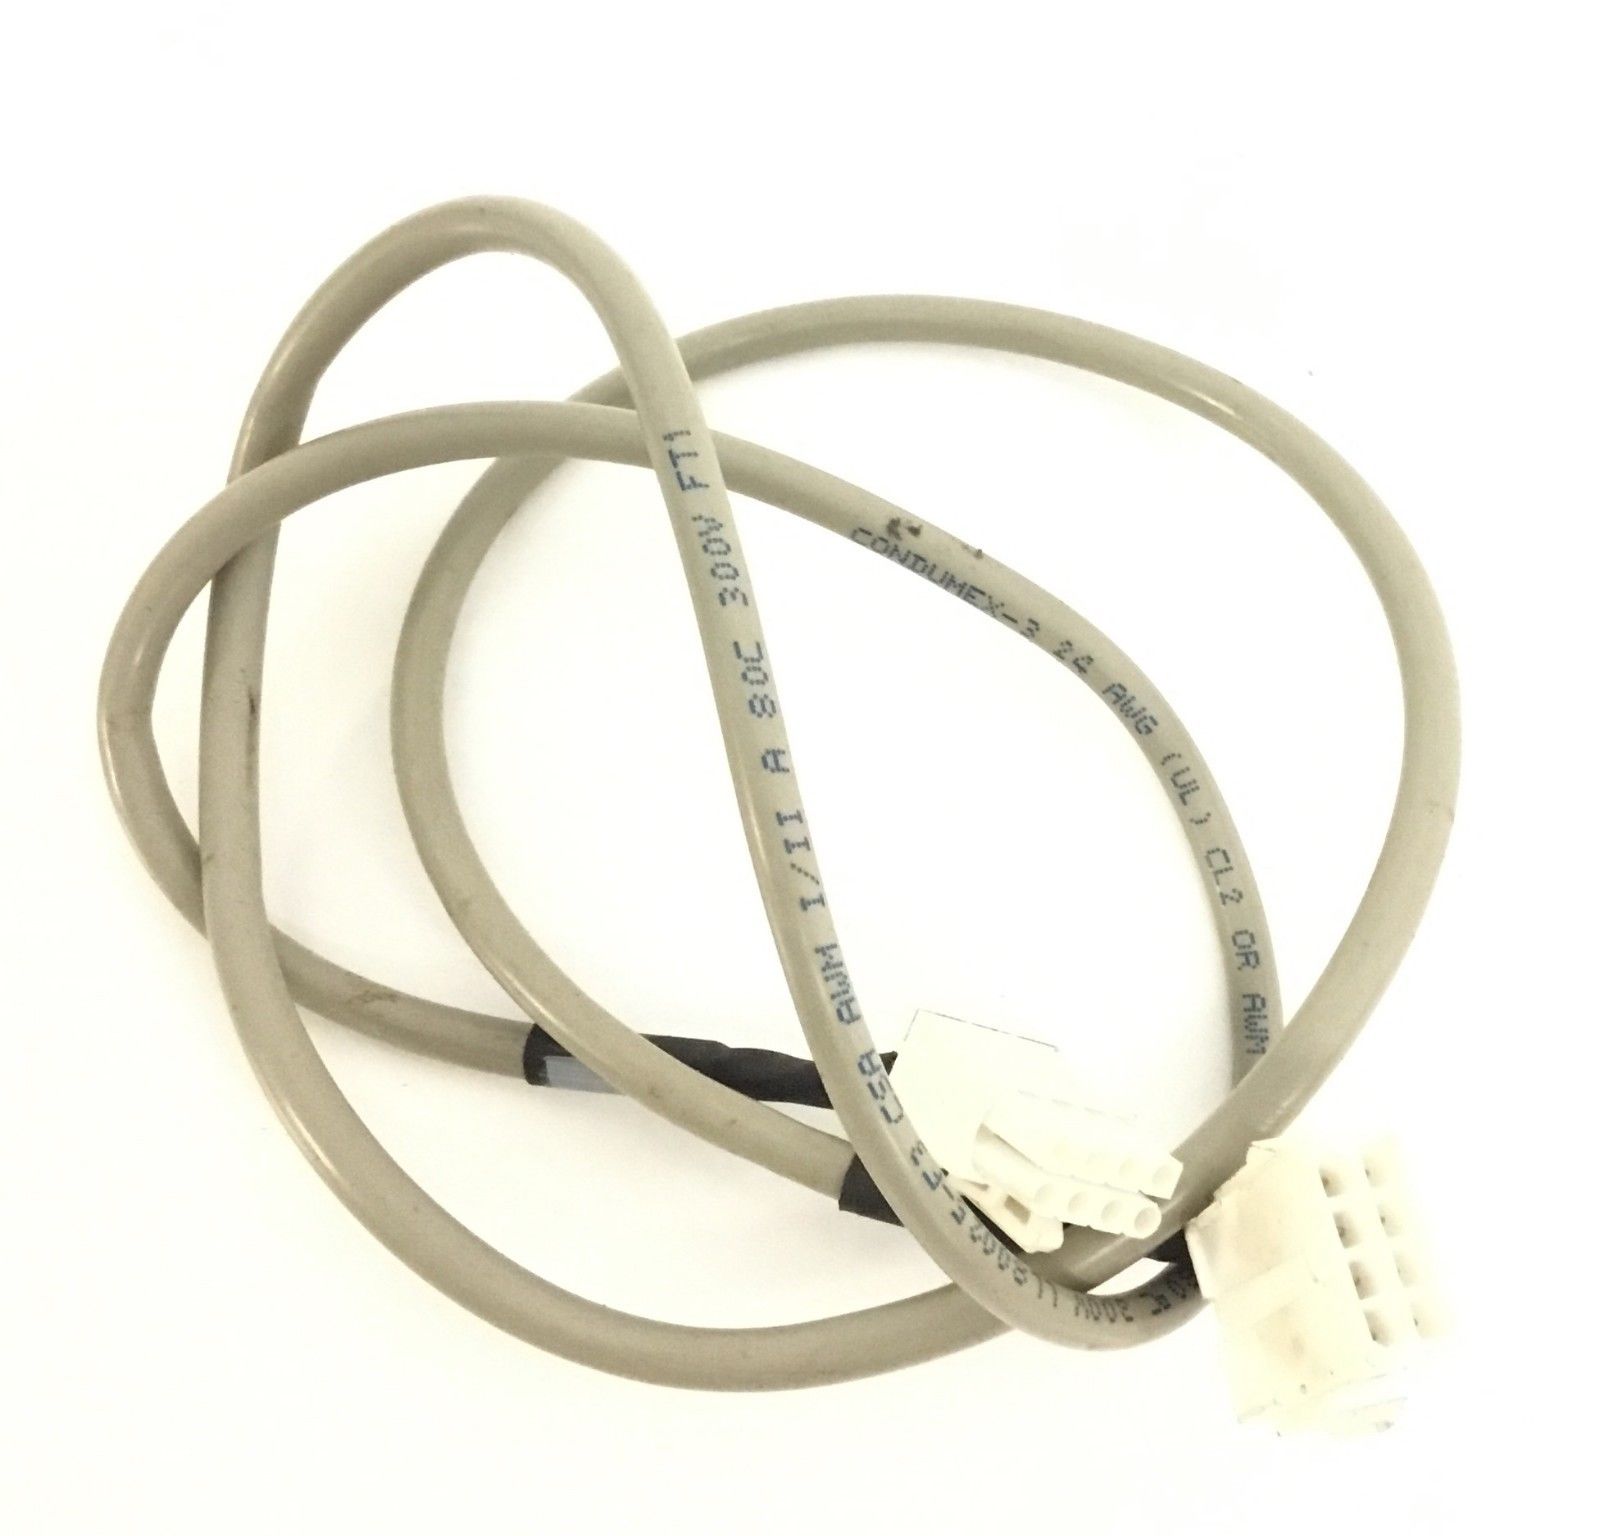 Lower Level Data Cable (Used)